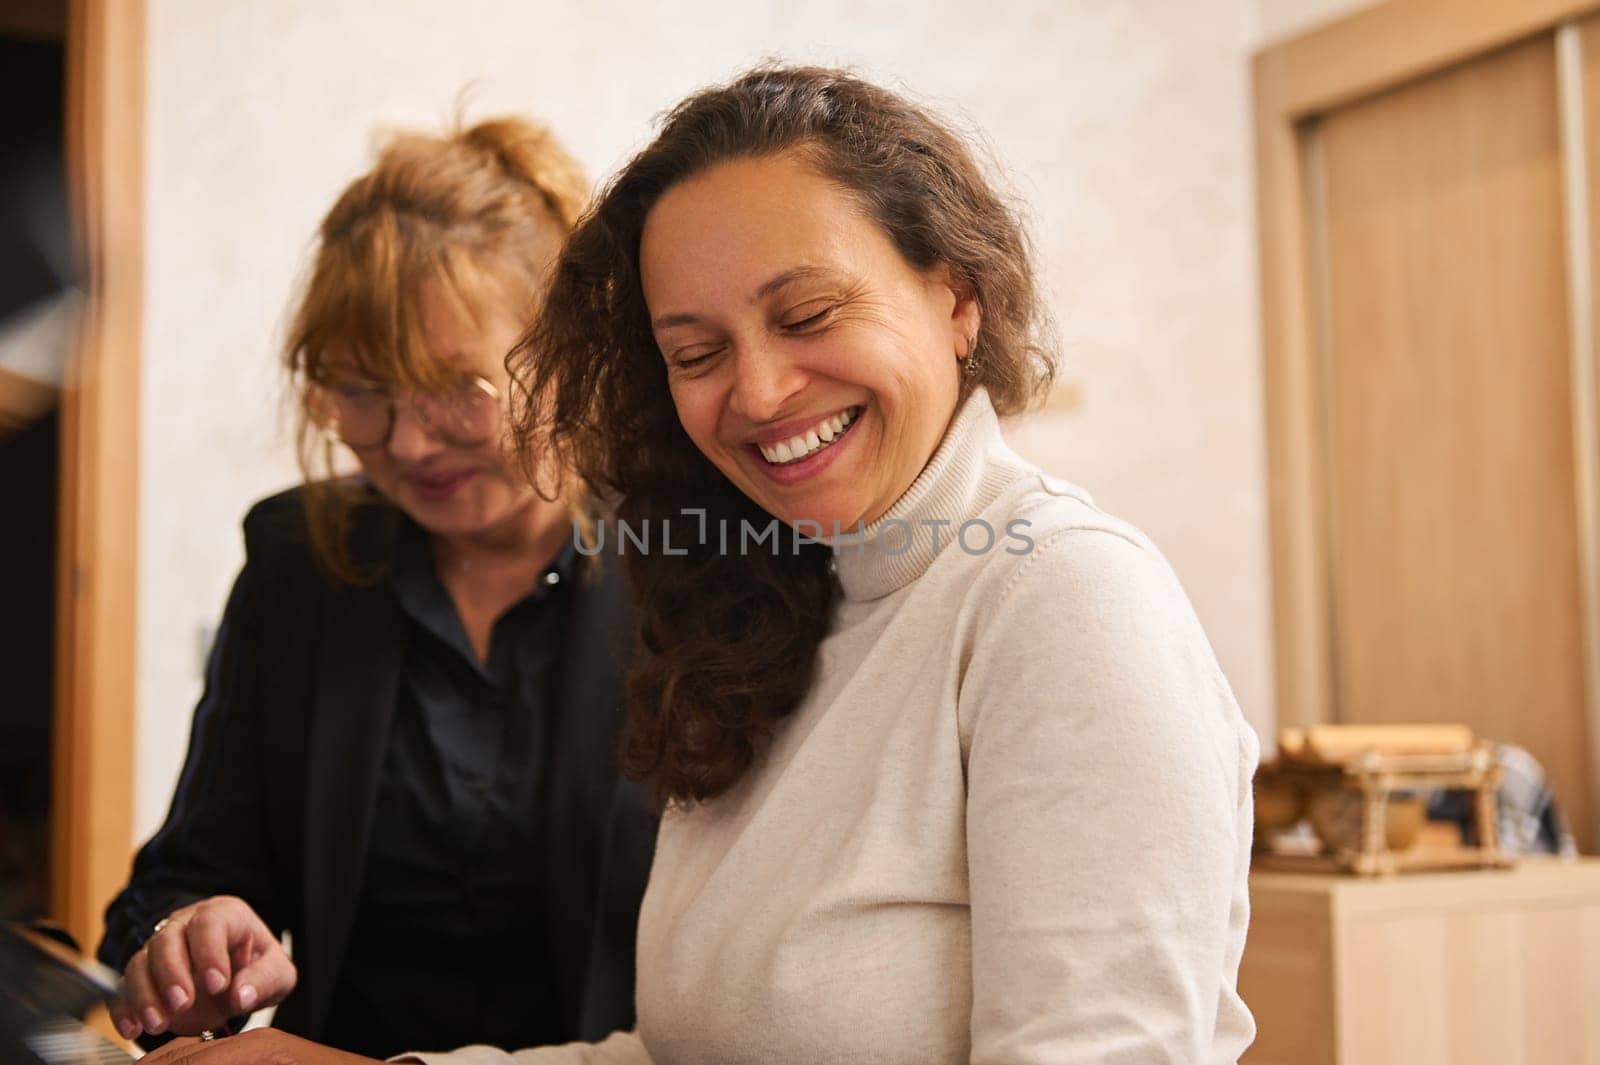 Happy women enjoy playing music on grand piano during individual music lesson indoor. African American young adult woman smiling broadly while learning playing on chord musical instrument